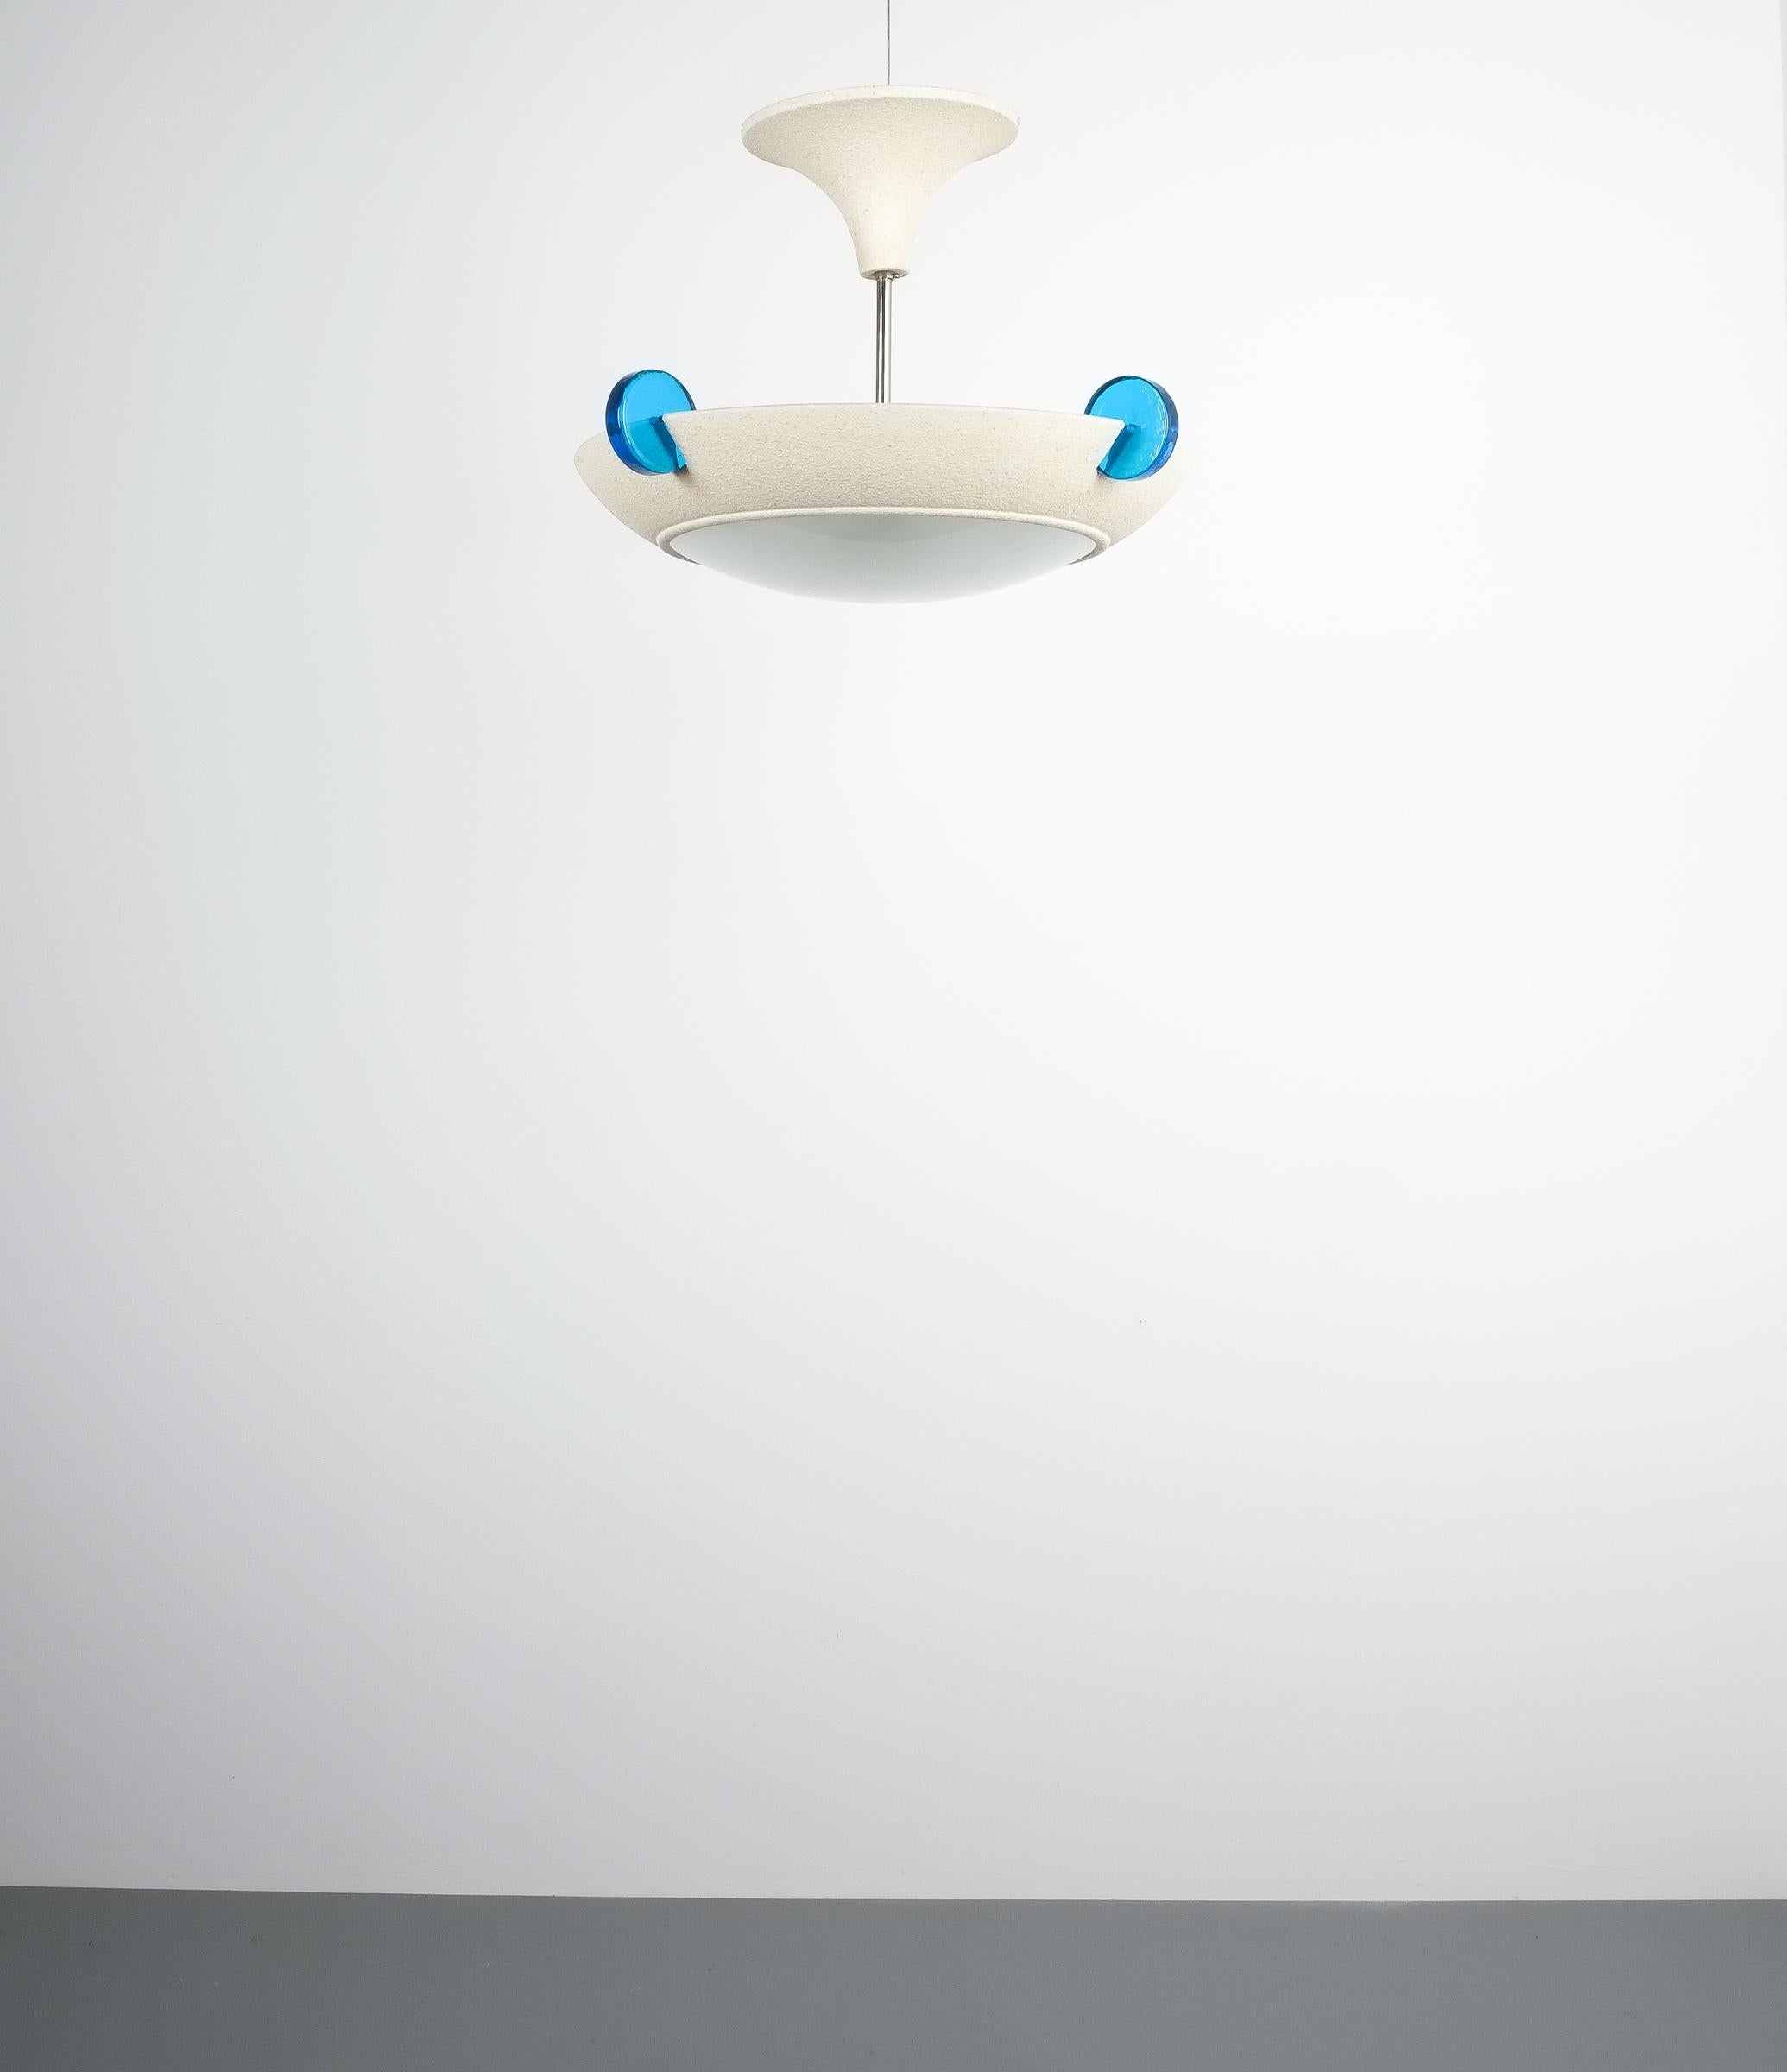 Postmodern Memphis style semi flush mount or chandelier, Italy, circa 1985. Very rare 23” light fixture featuring an opal glass dome and 4 heavy blue glass chunks around a metal structure with an unusual lacquered finish. It can either be used as a